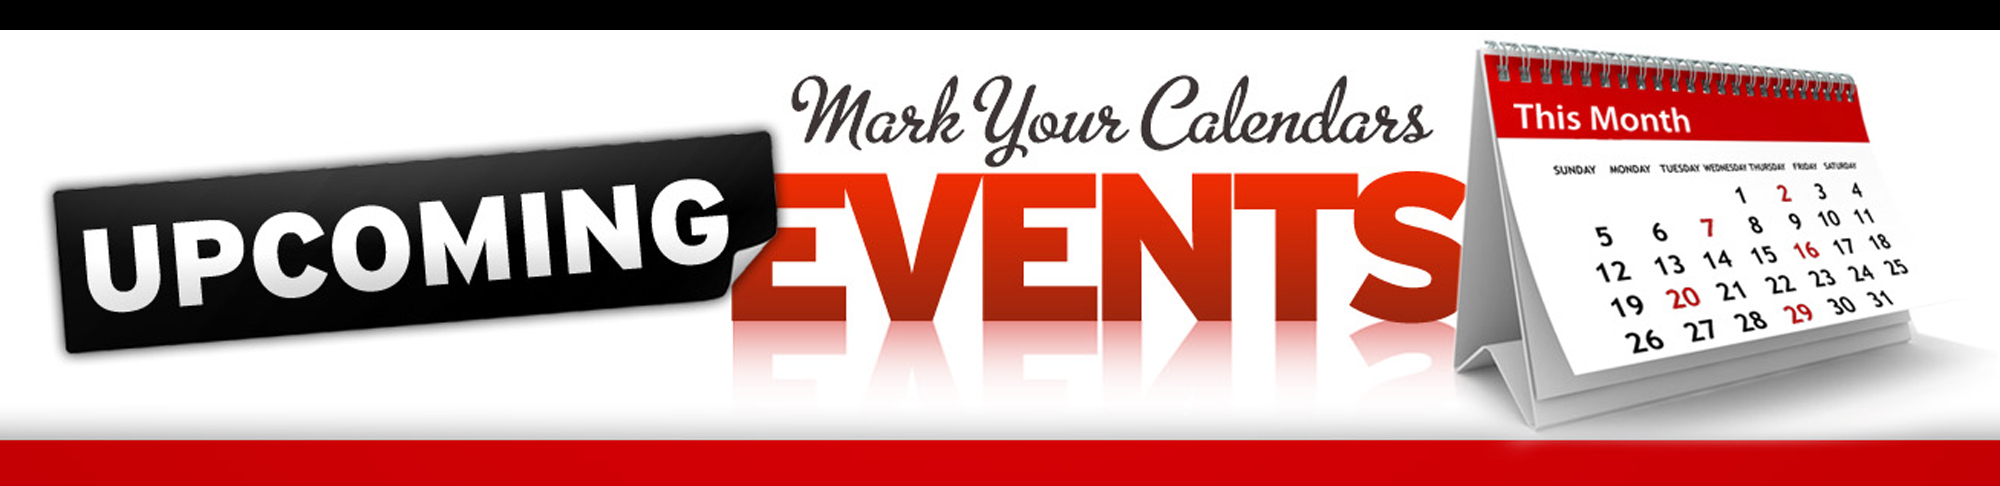 Free Upcoming Events Cliparts, Download Free Clip Art, Free.